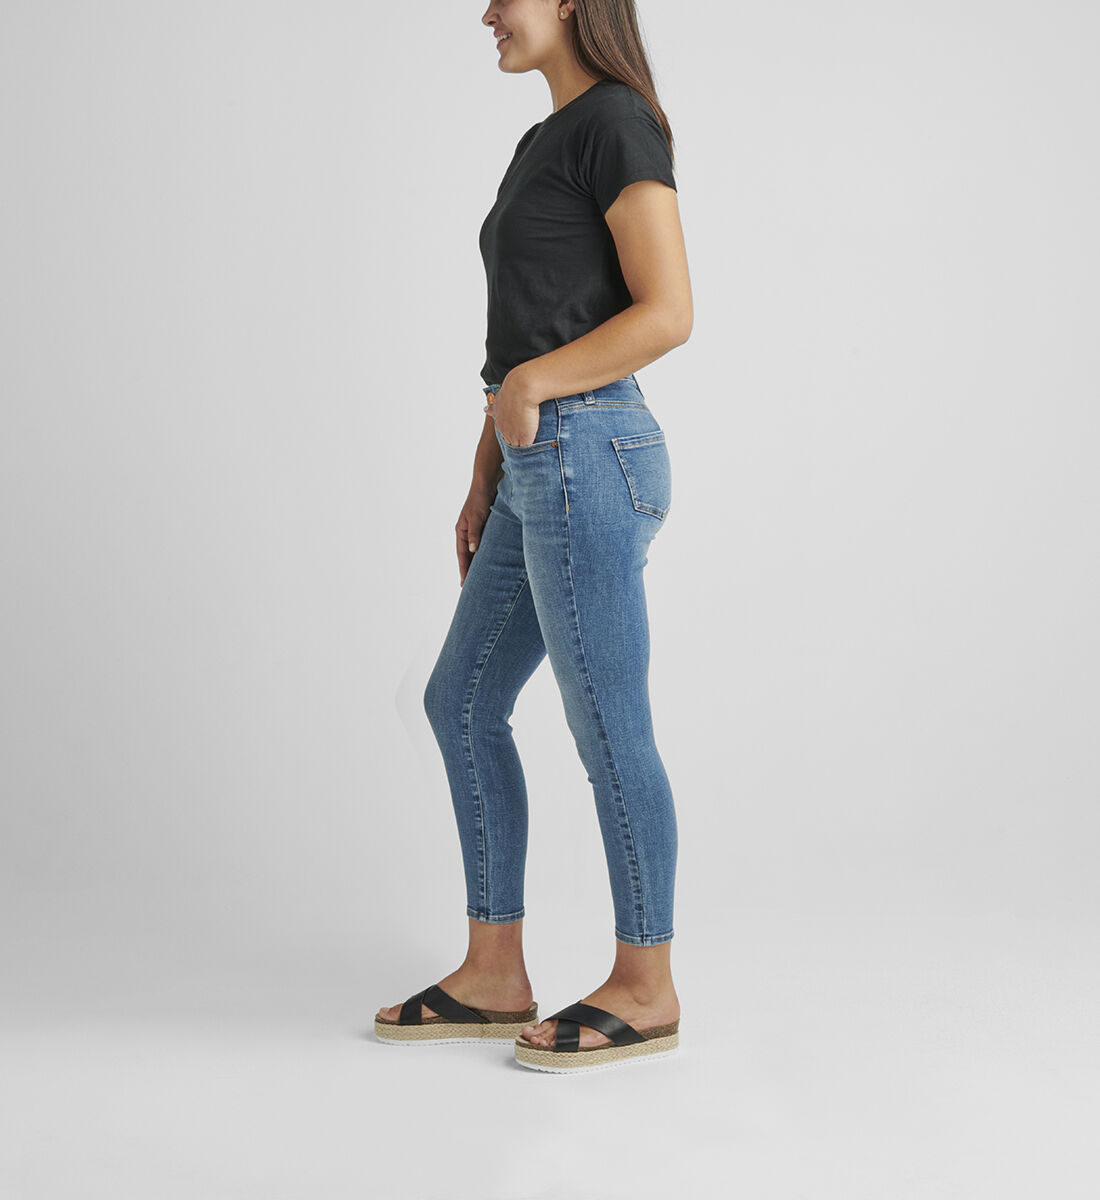 Valentina High Rise Skinny Crop Pull-On Jeans Petite Side